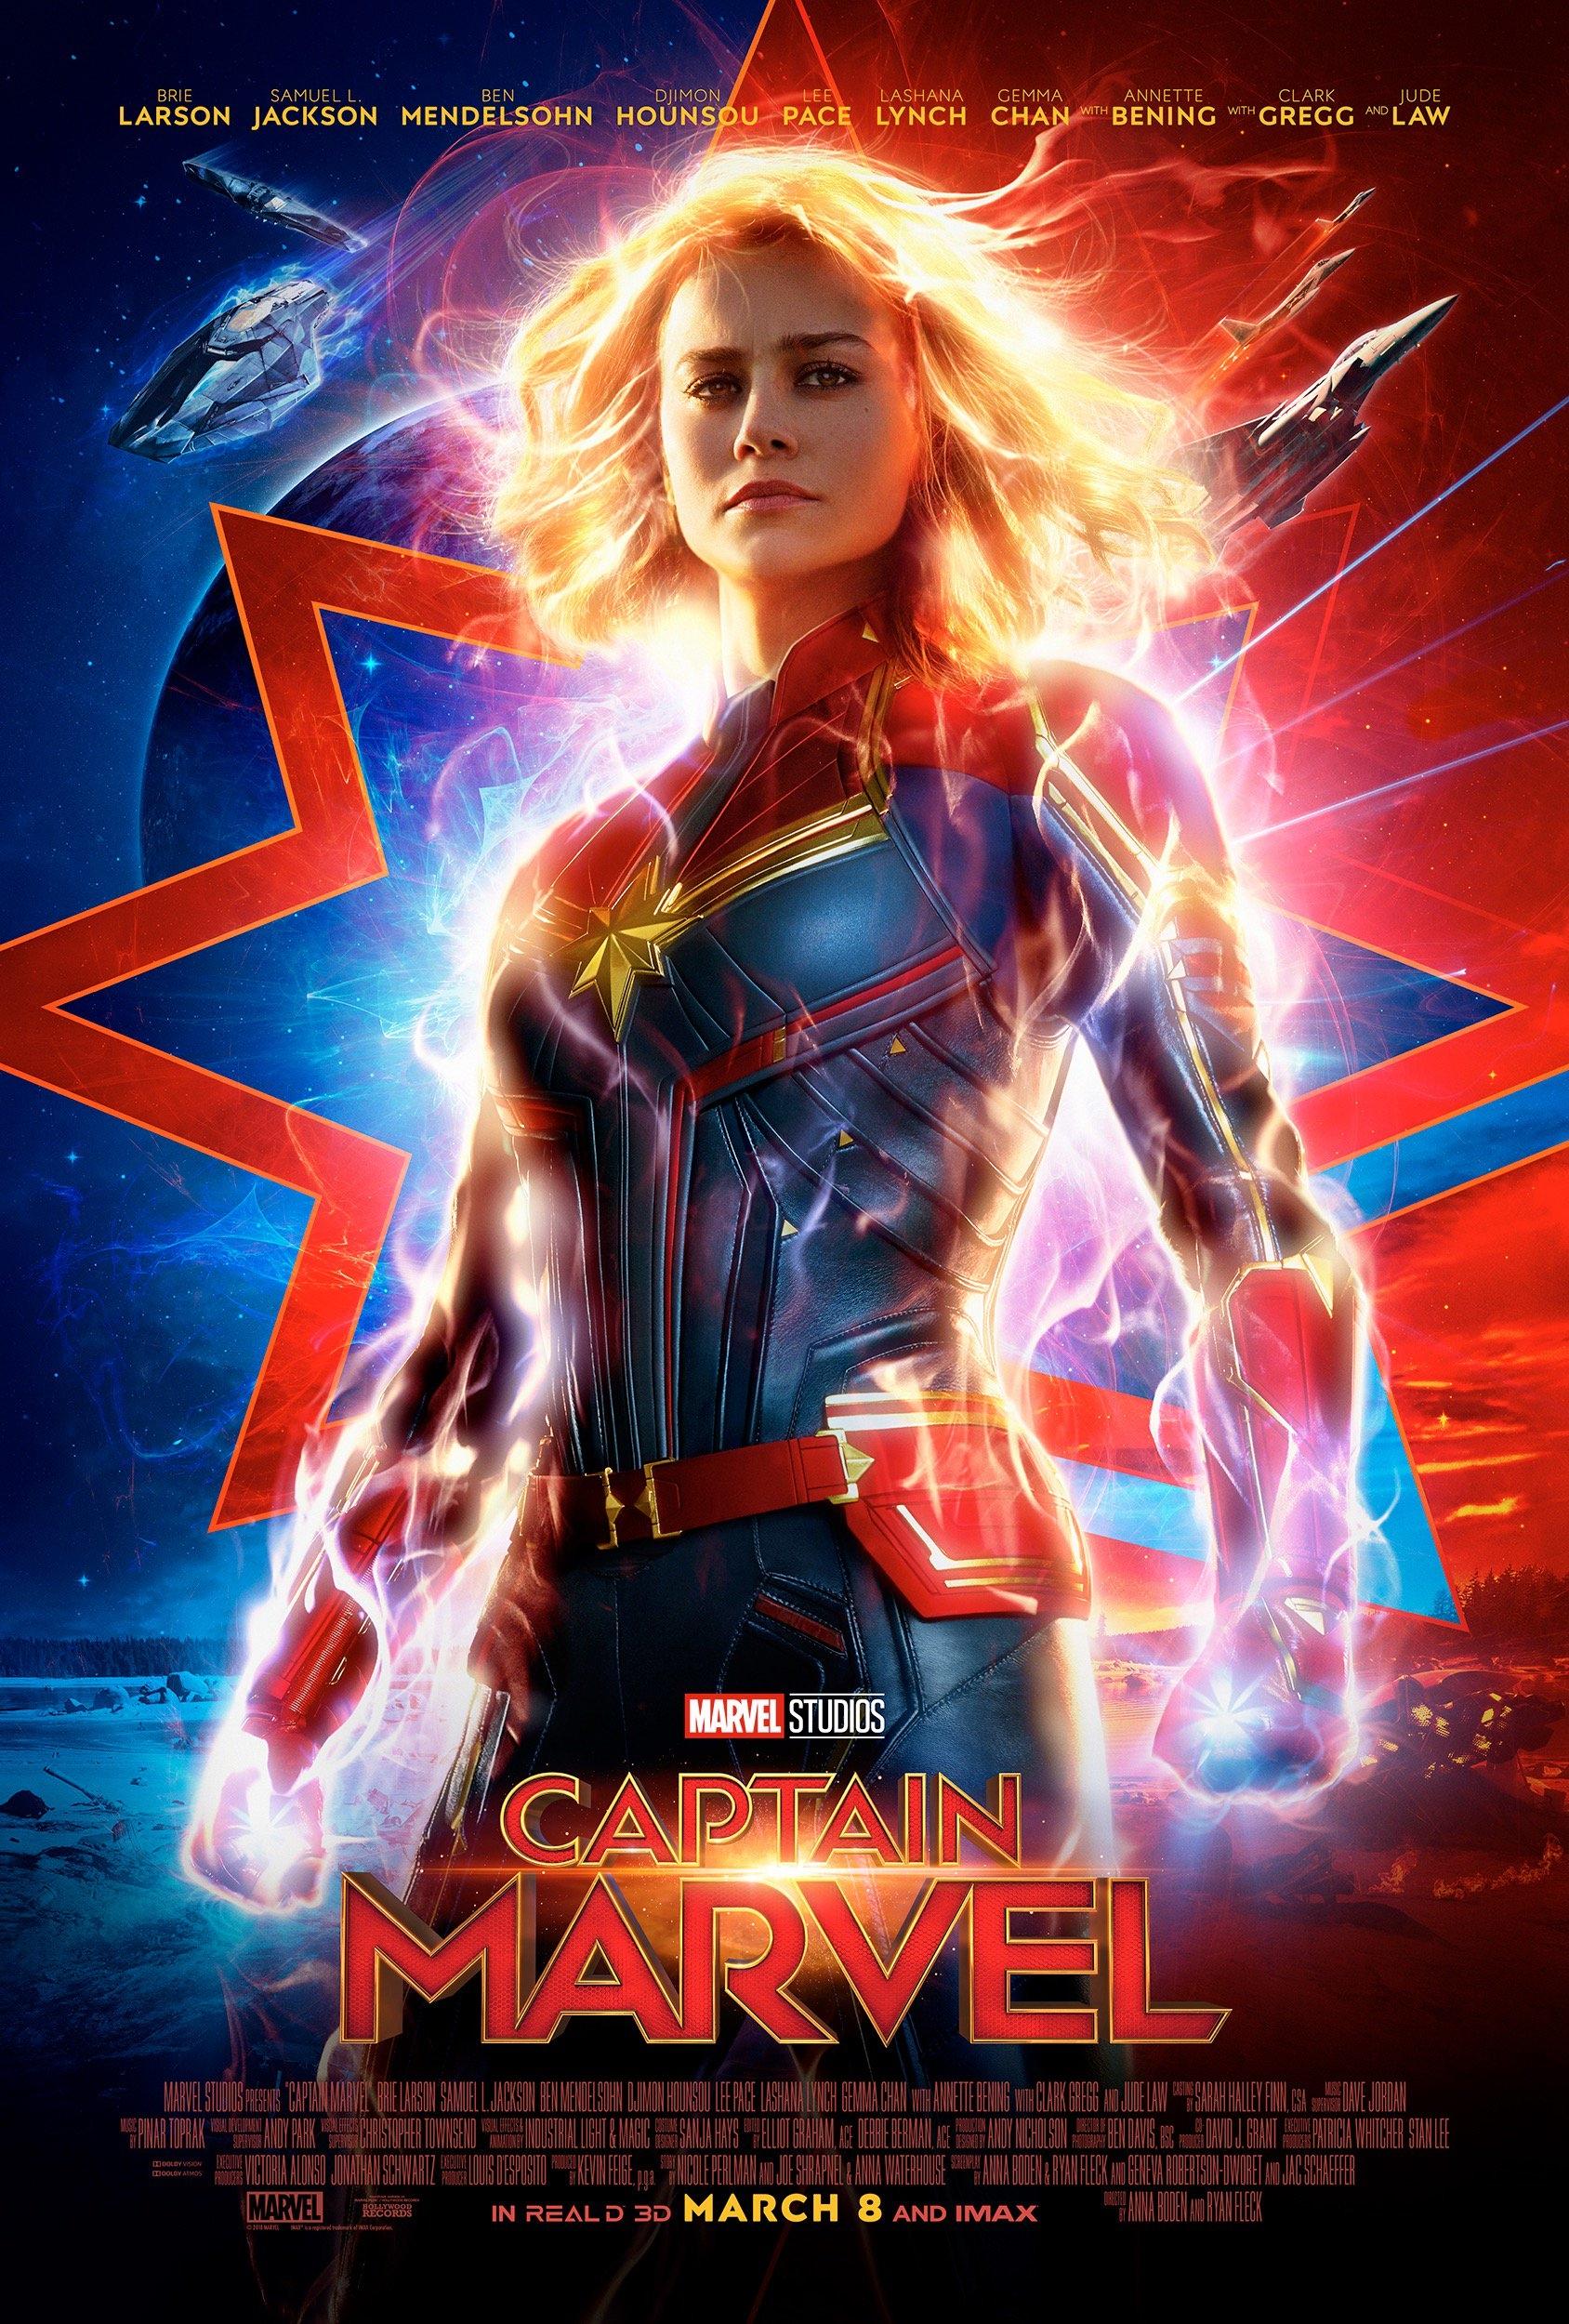 Captain Marvel (March 8, 2019) - Travel back to the 1990s and follow Carol Danvers as she becomes one of the universe's most powerful heroes in a battle against intergalactic threats.